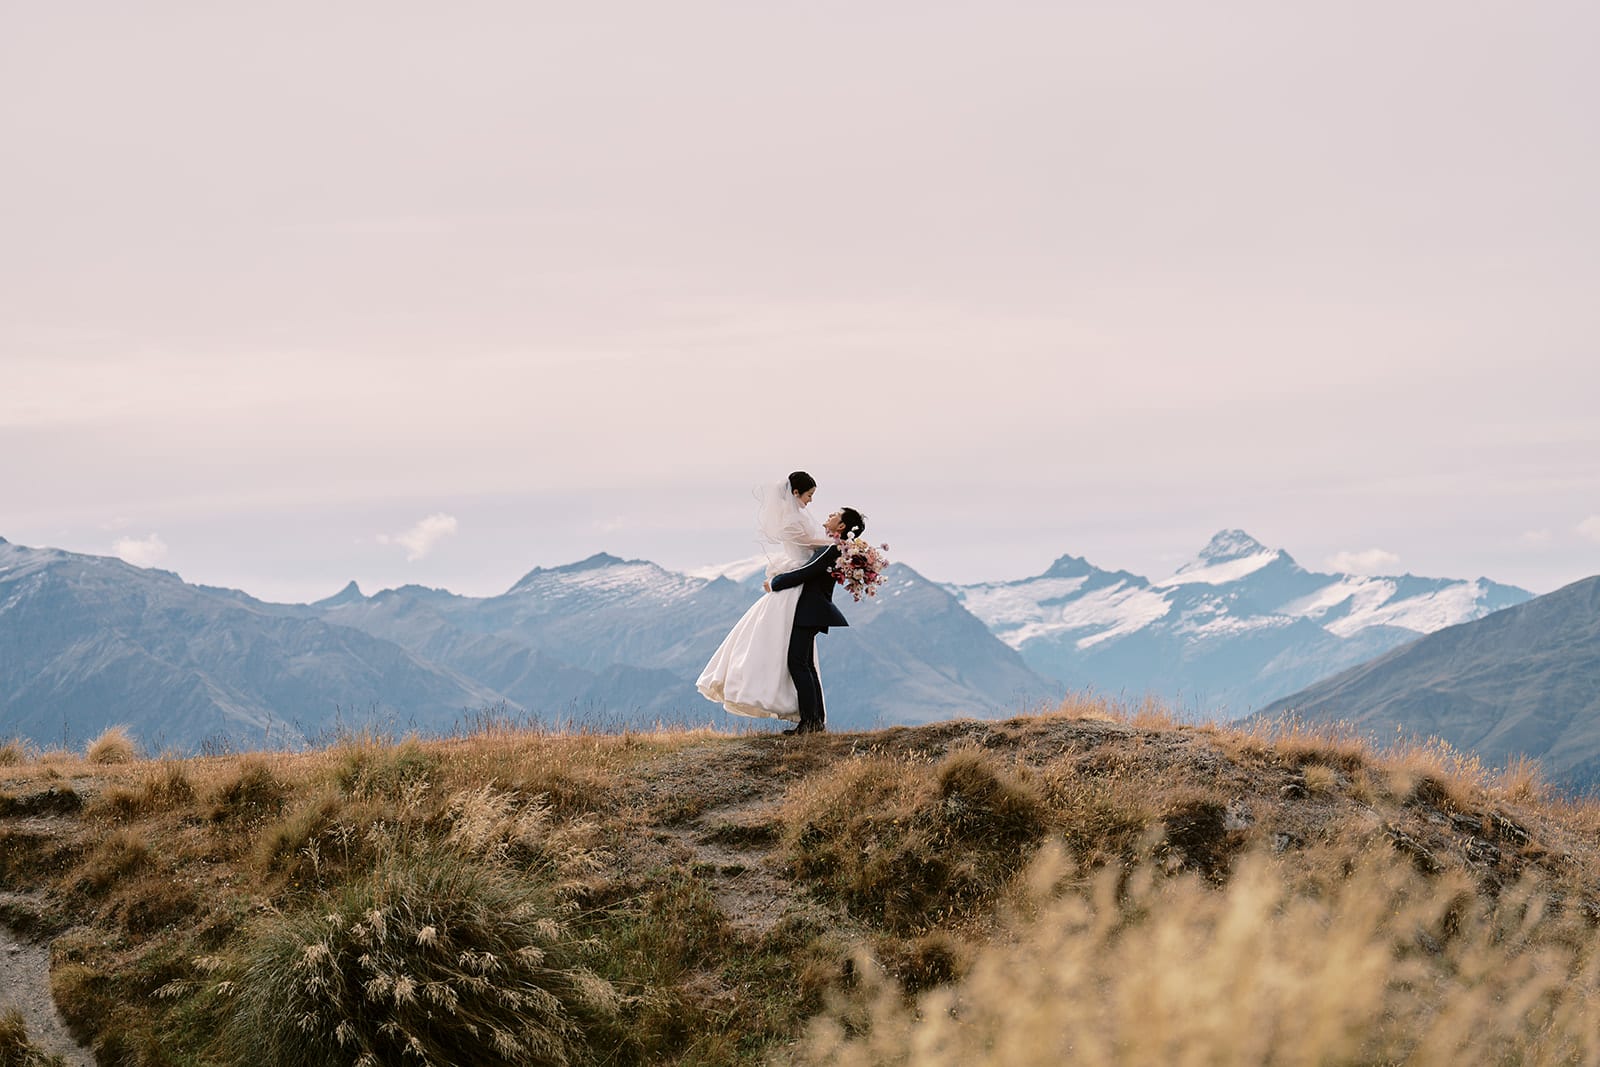 Queenstown Tekapo New Zealand Heli Wedding Elopement Pre-Wedding Shoot Photographer クイーンズタウン　テカポ　ニュージーランド　エロープメント 前撮り　フォトウェディング　結婚式 | A couple in wedding attire embracing on a hill with mountain scenery in the background, captured seamlessly by a renowned Queenstown Wedding Photographer.